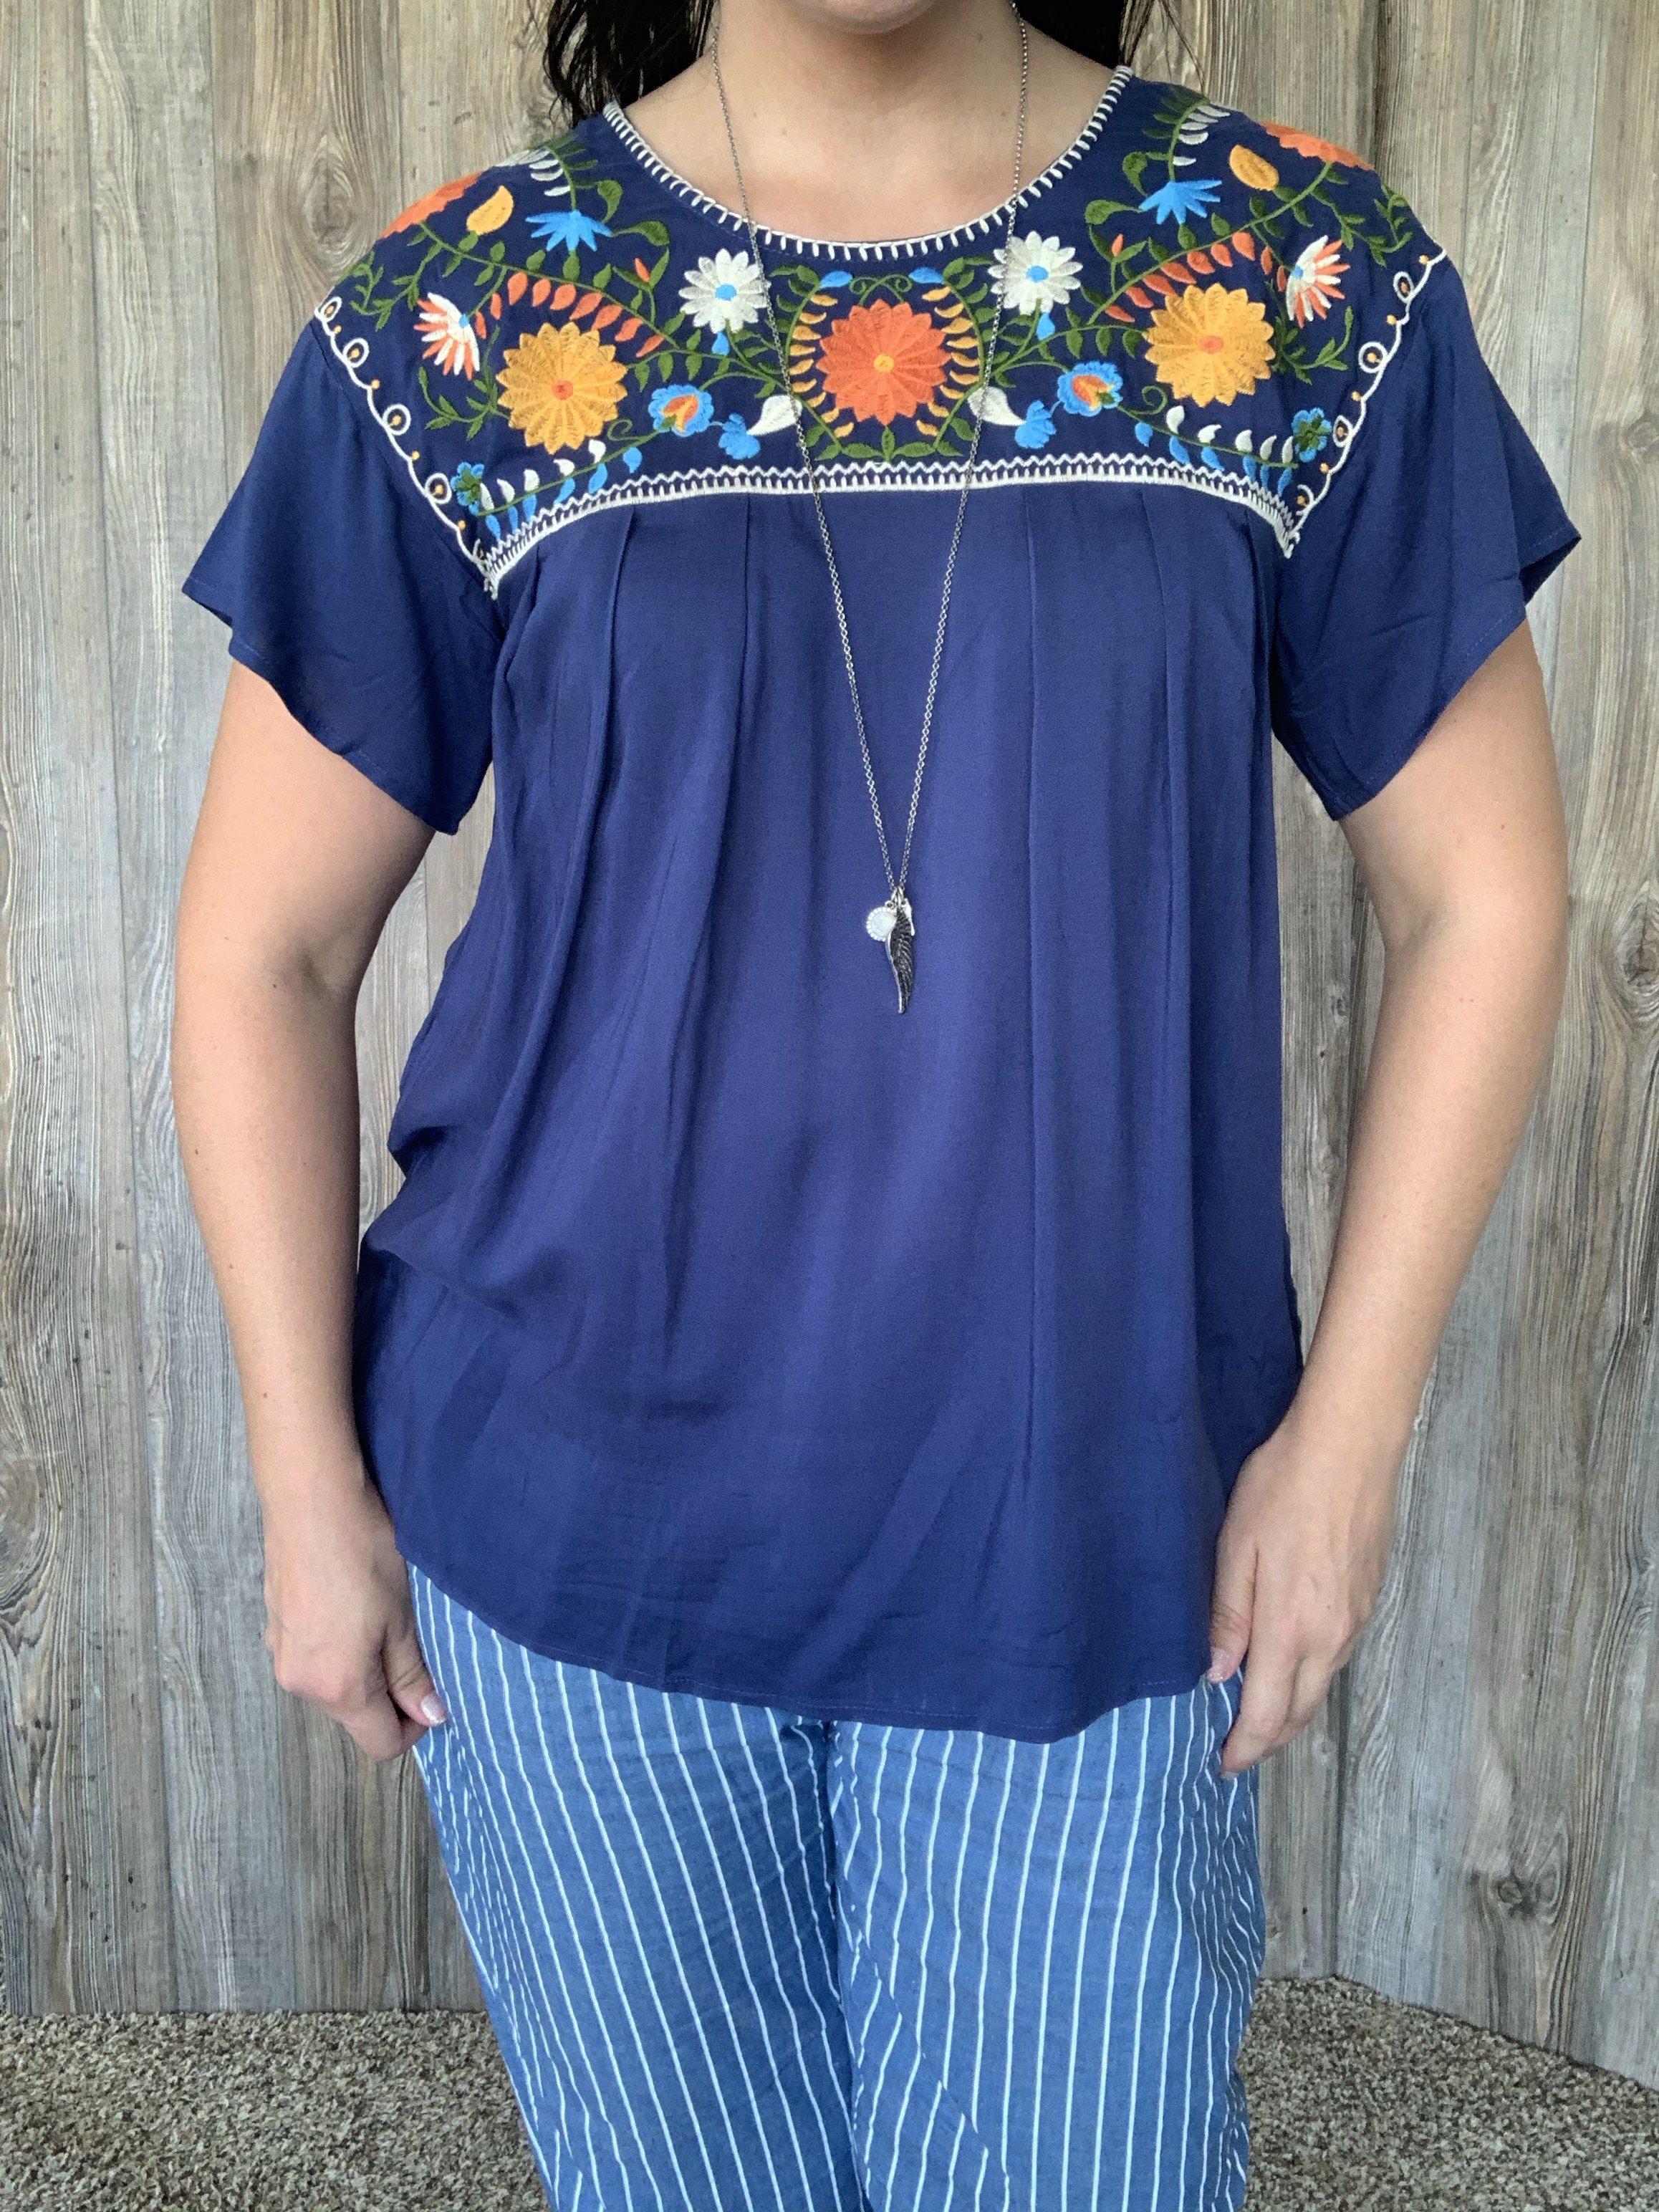 Multi-Colored Embroidered Navy Top